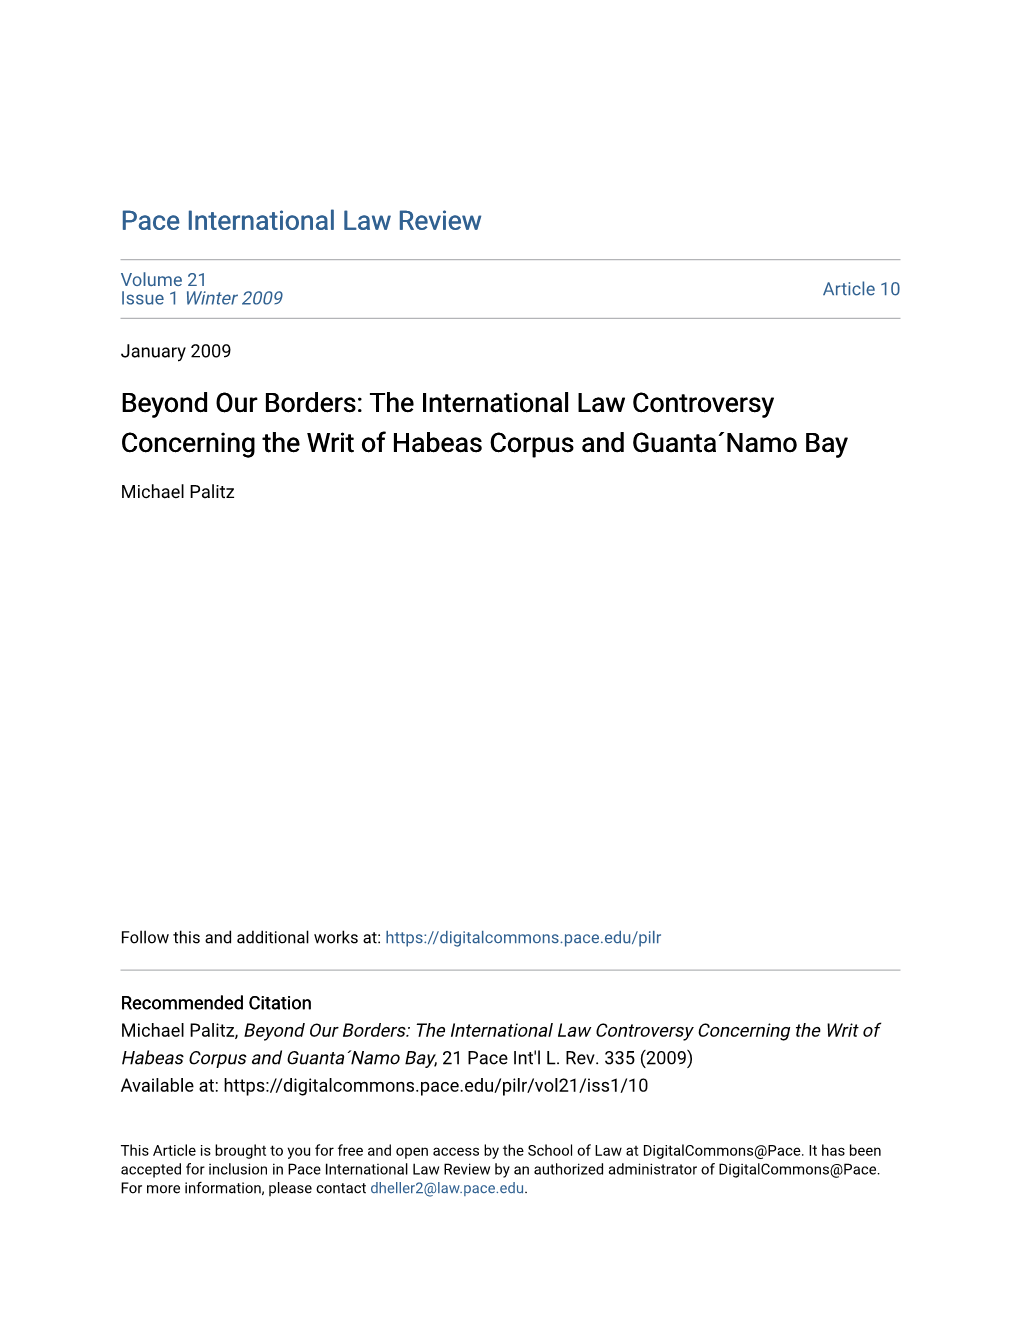 The International Law Controversy Concerning the Writ of Habeas Corpus and Guantaâ´Namo